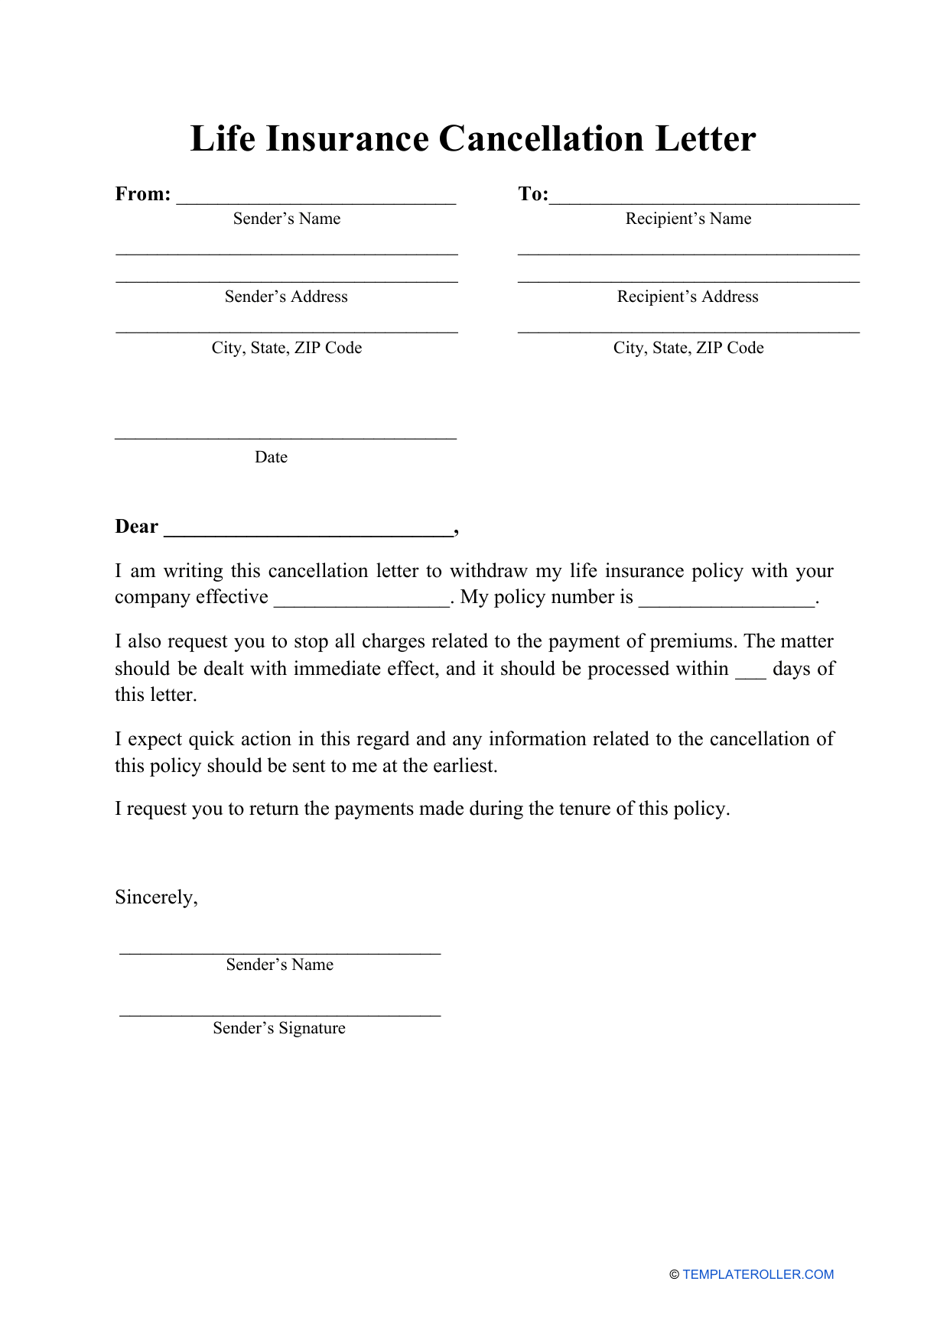 Life Insurance Cancellation Letter Template Fill Out Sign Online and